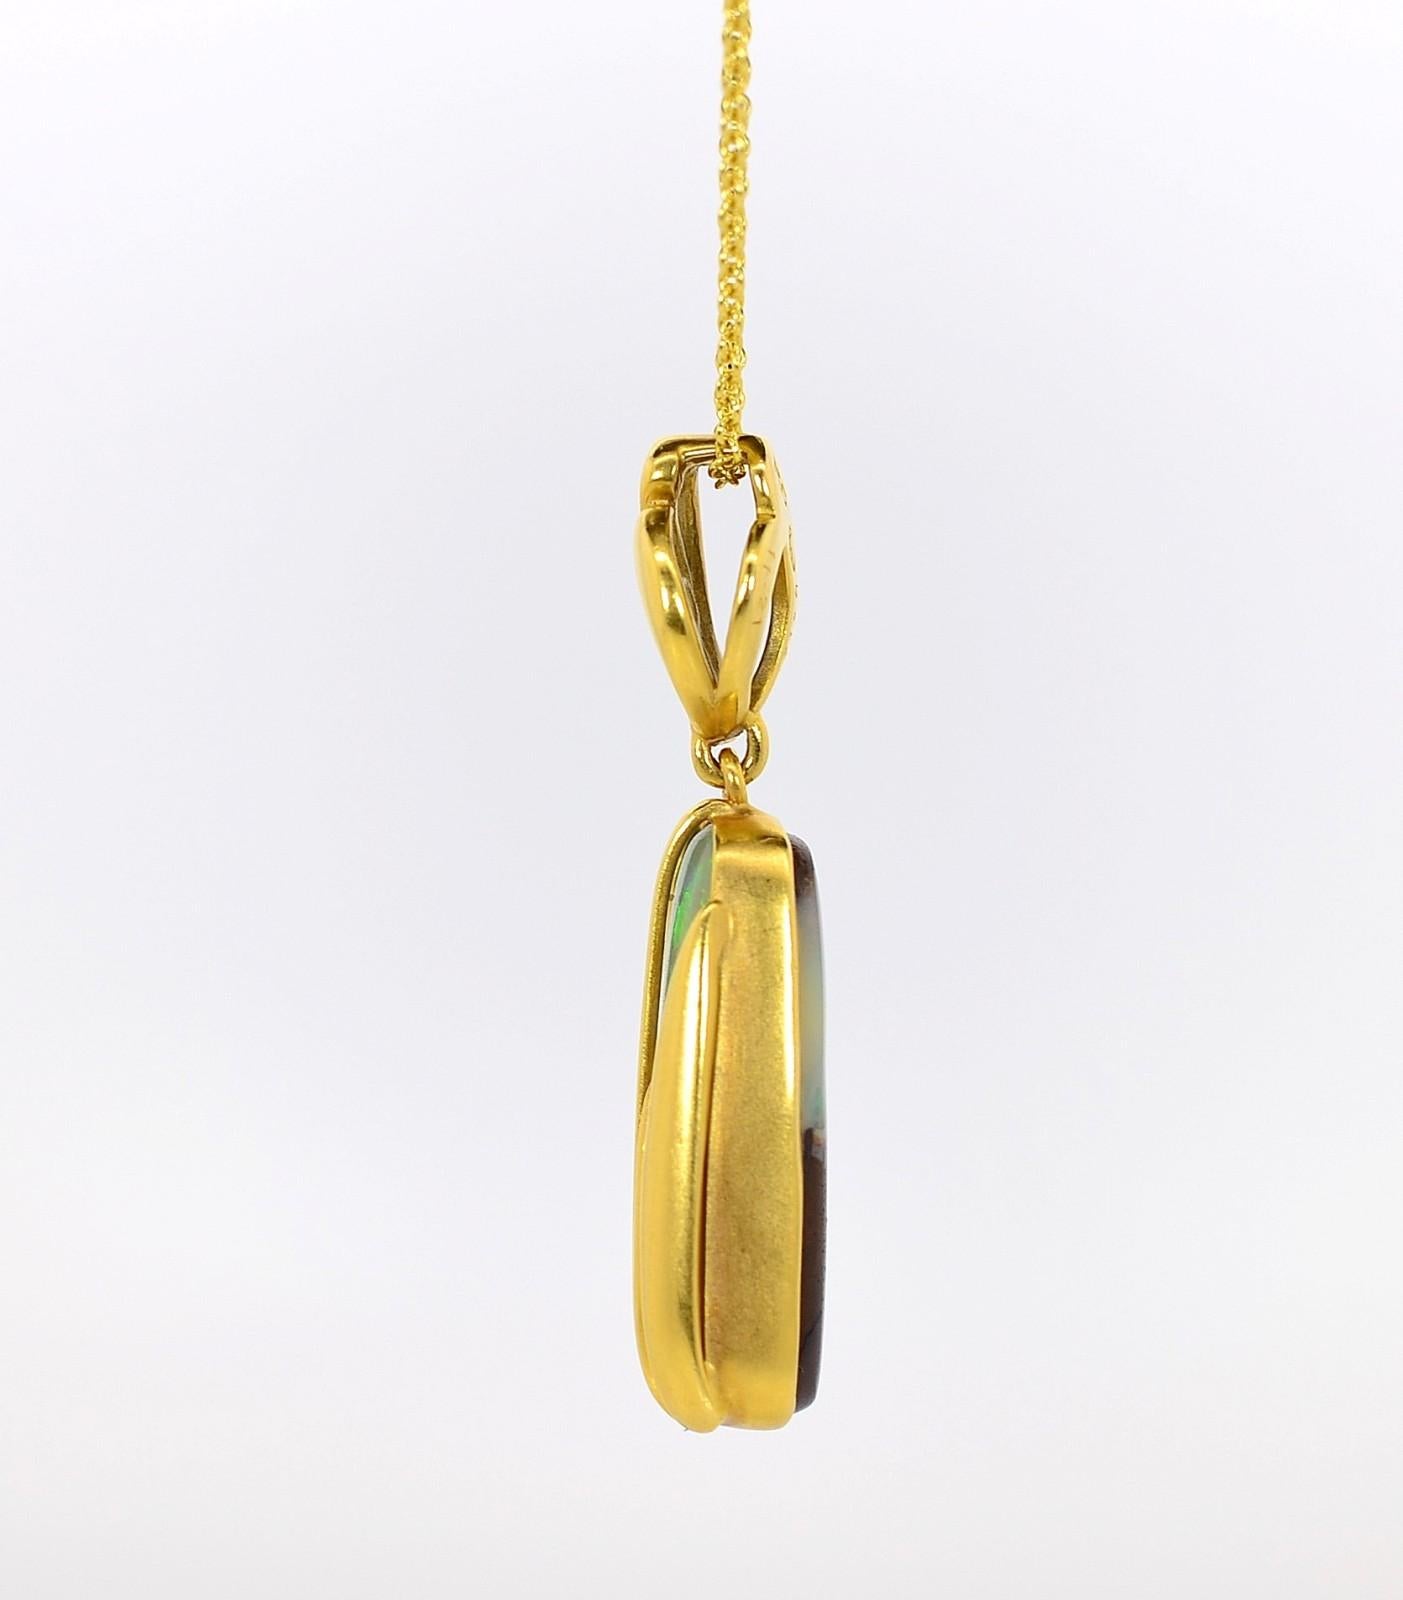 Artistically hand crafted in 18KT yellow gold this one-of--a-kind pendant showcases a beautiful lozenge shape 11.21 carat Boulder Opal.  The semi-translucent bezel set Opal radiates colorful patches of pastel blues and greens.  Dangling from a